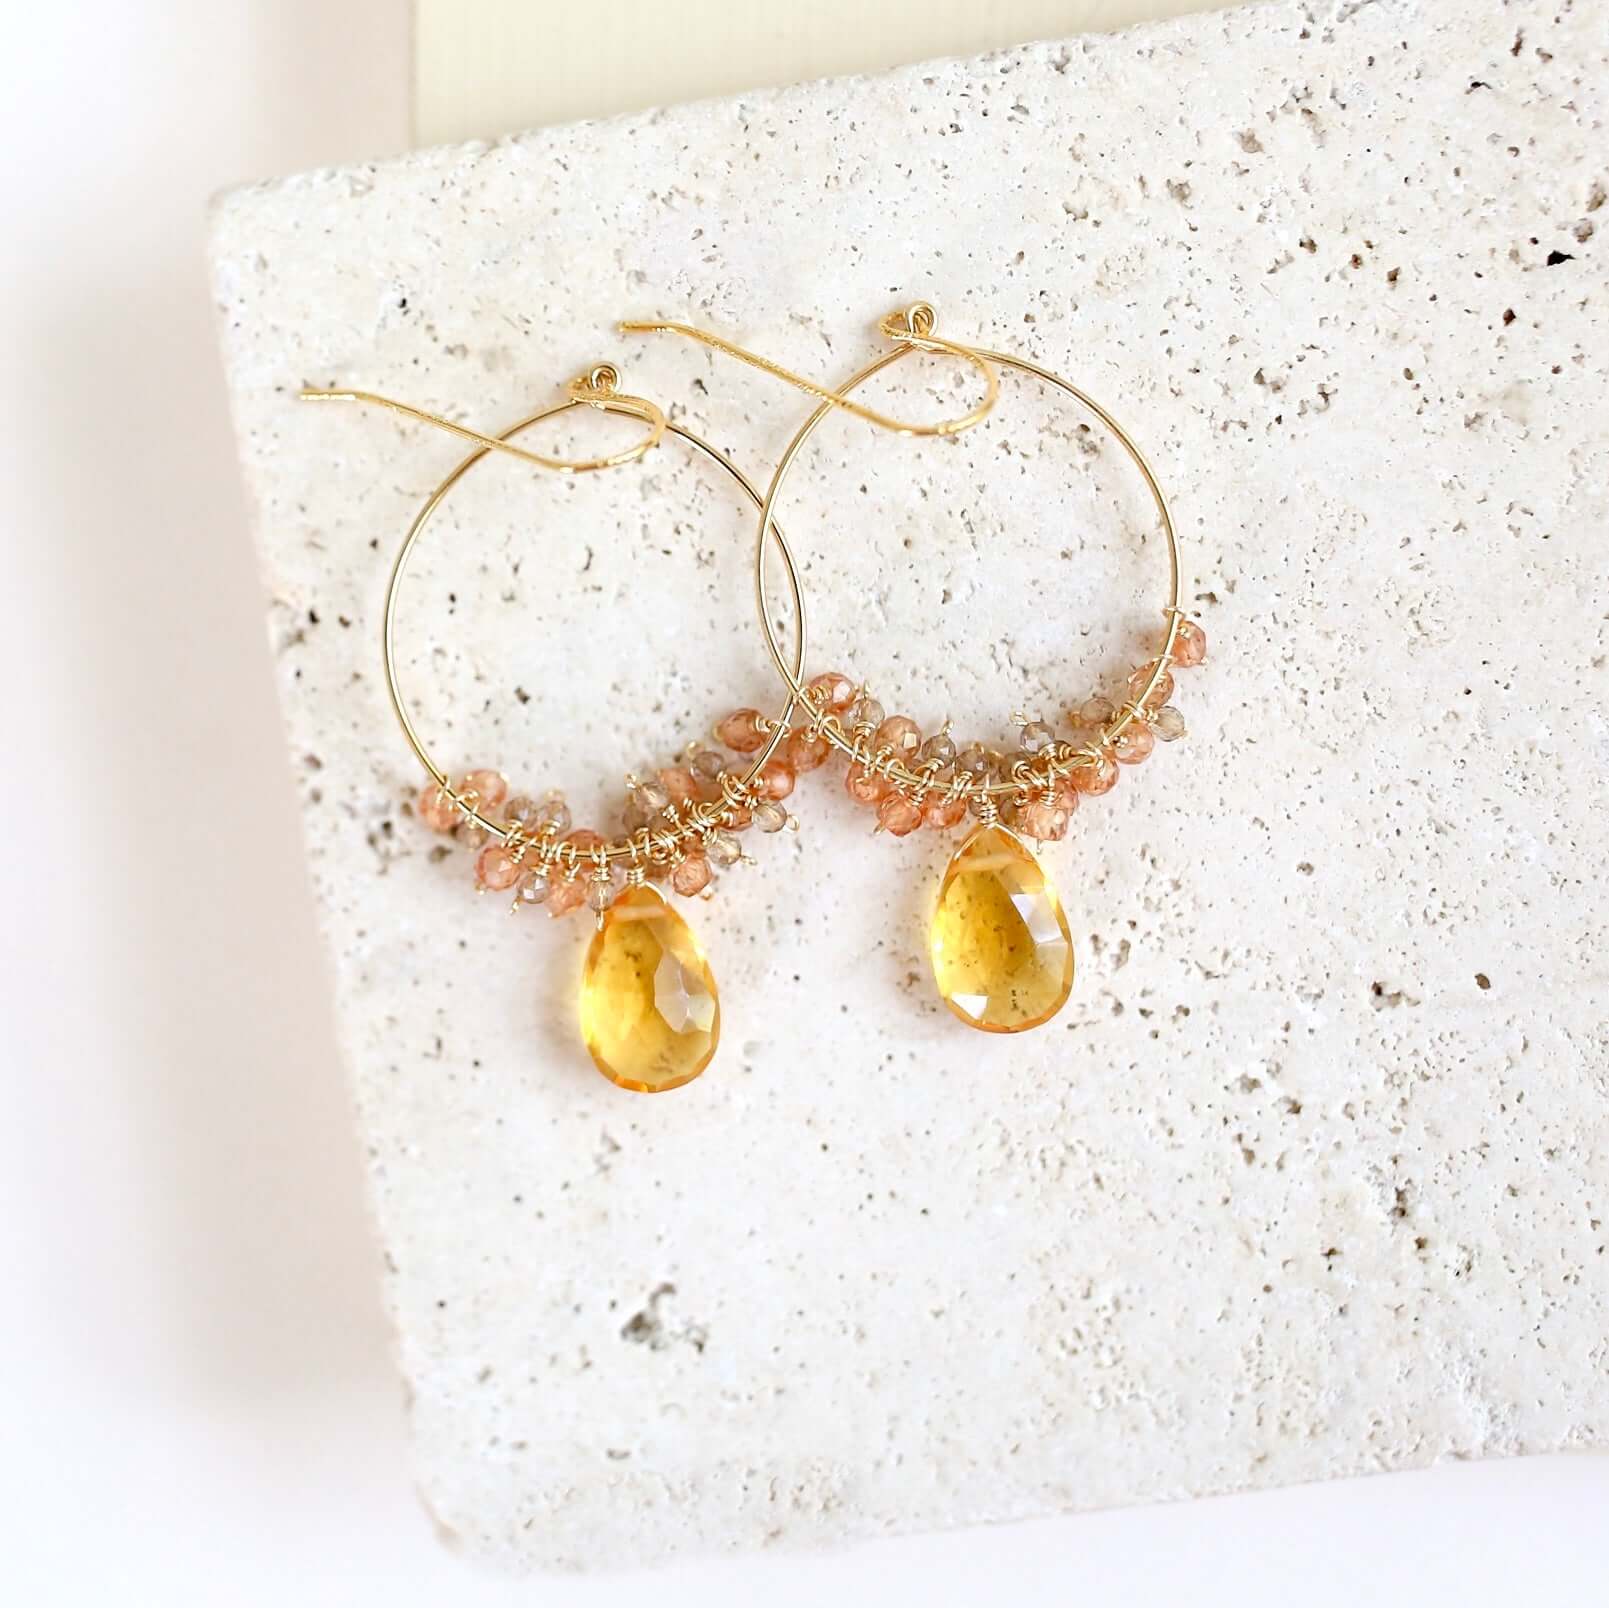 Easy-to-Wear Swing Earrings with Citrine Gemstone Charms